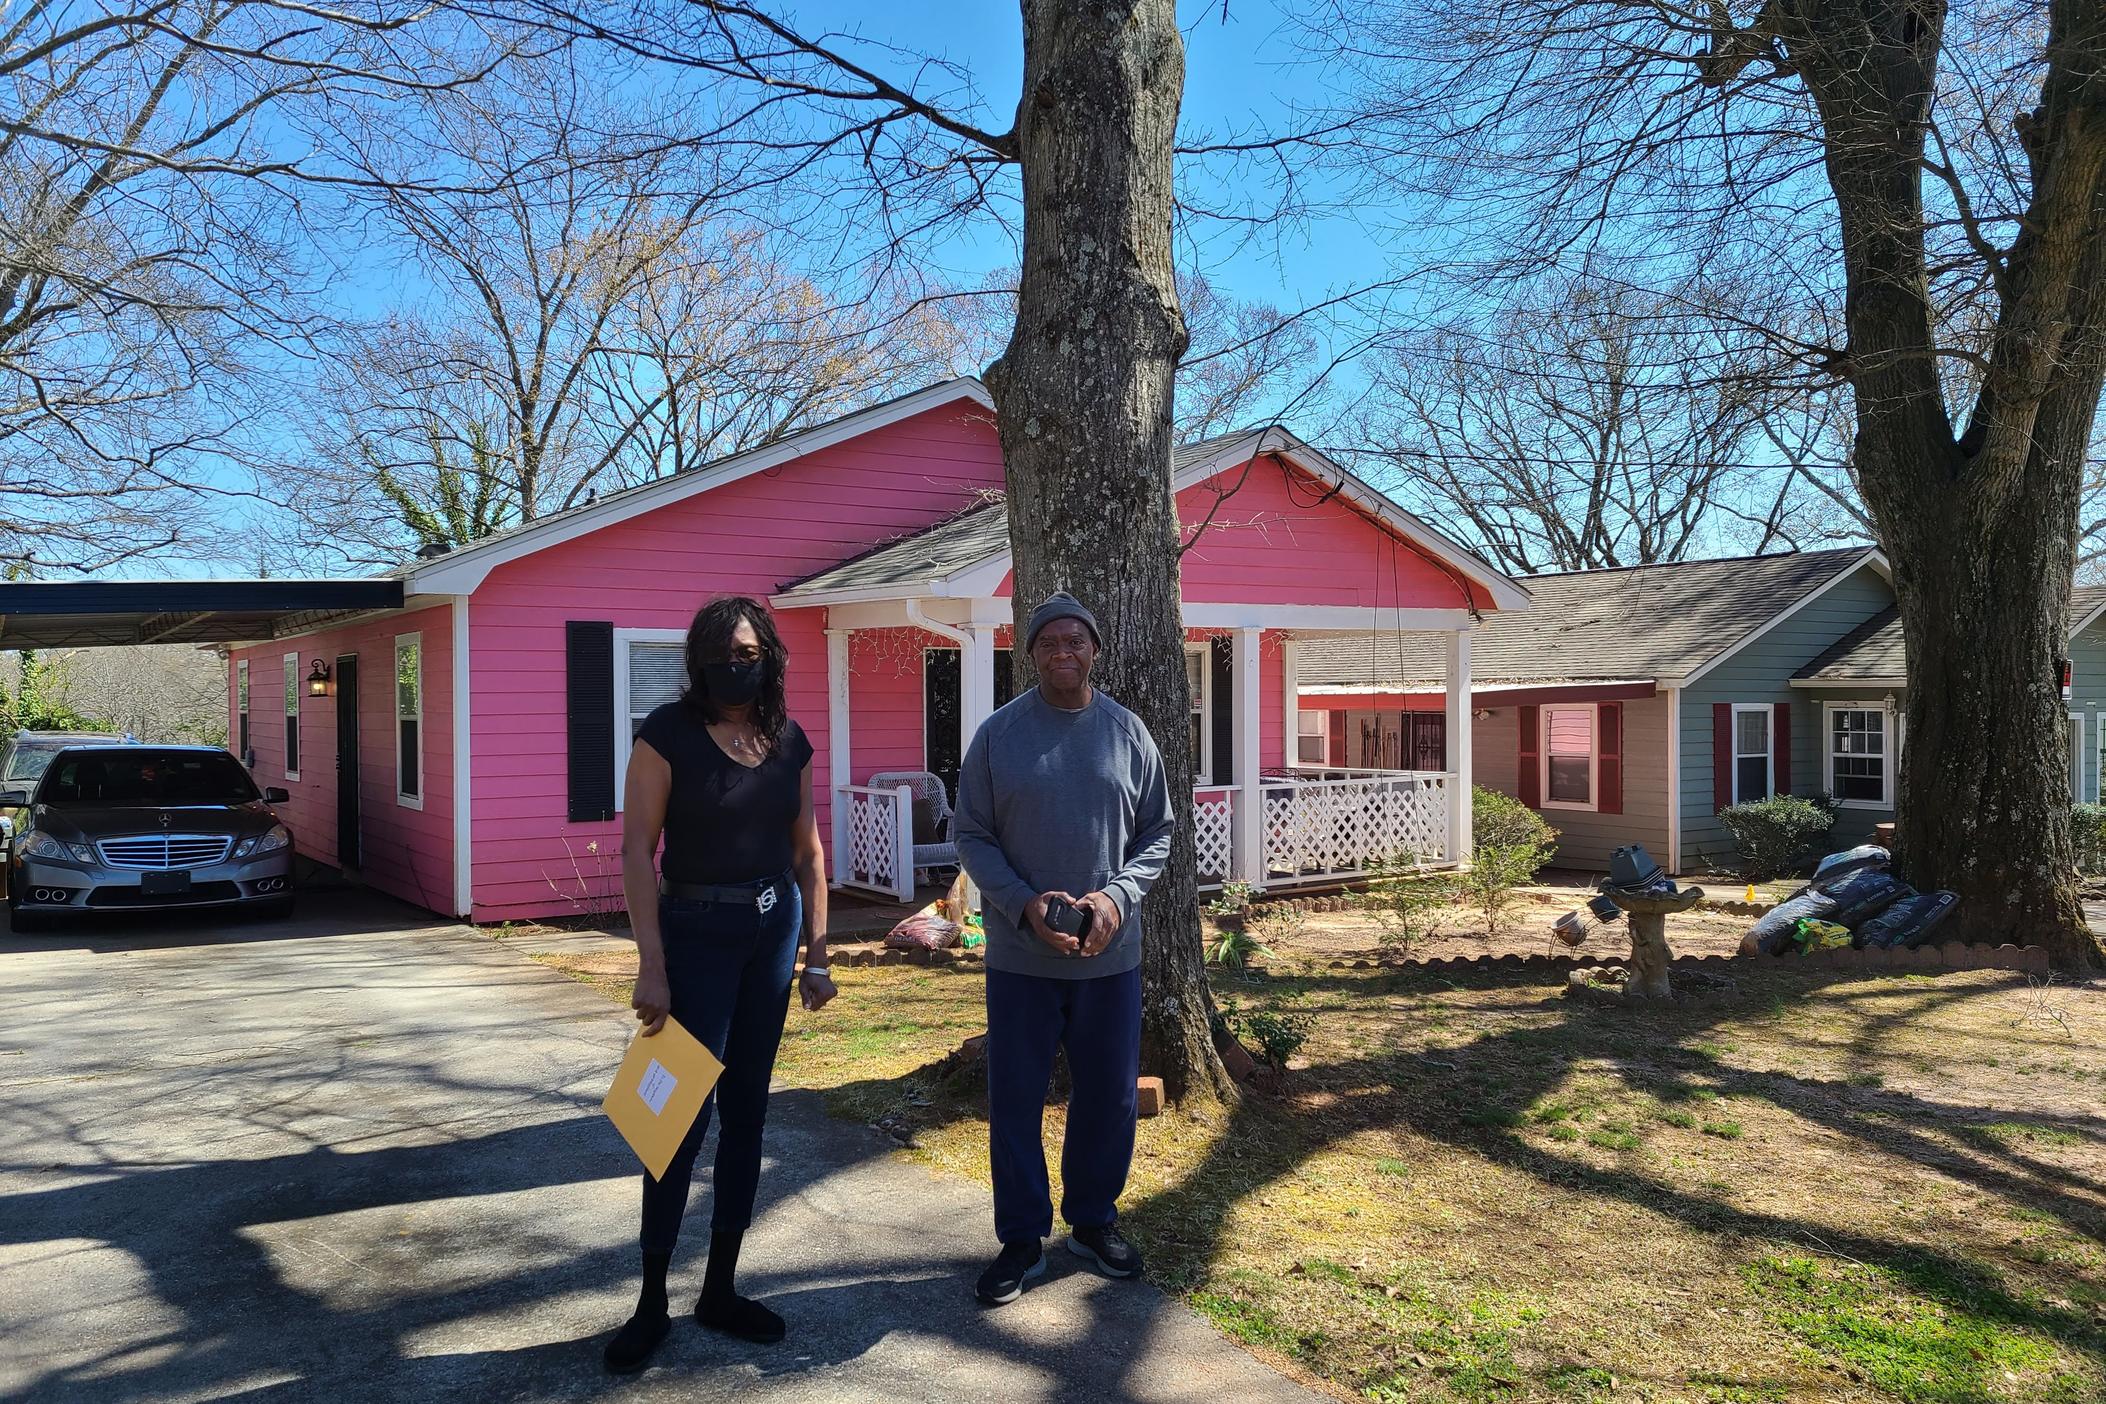 Neighbors Lelia Middlebrook and Ron Hightower have been living in Edgewood for decades. As the neighborhood changes and prices go up they're among the many people looking for relief on their property taxes.